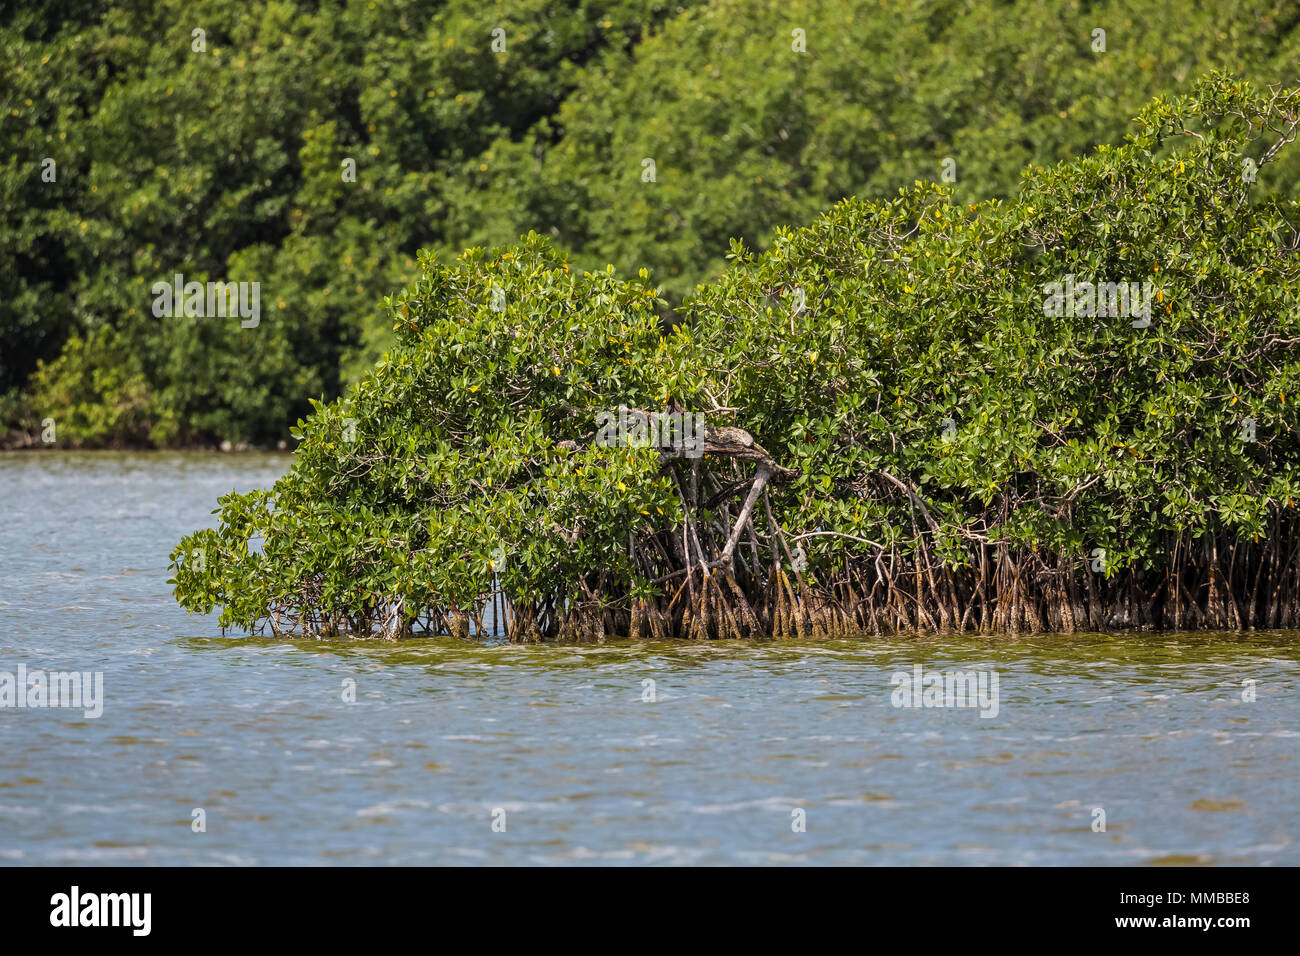 Red Mangrove, Rhizophora mangle, trees with a tangle of prop roots that resist the saltwater of the tides, in Everglades National Park, Florida, USA Stock Photo